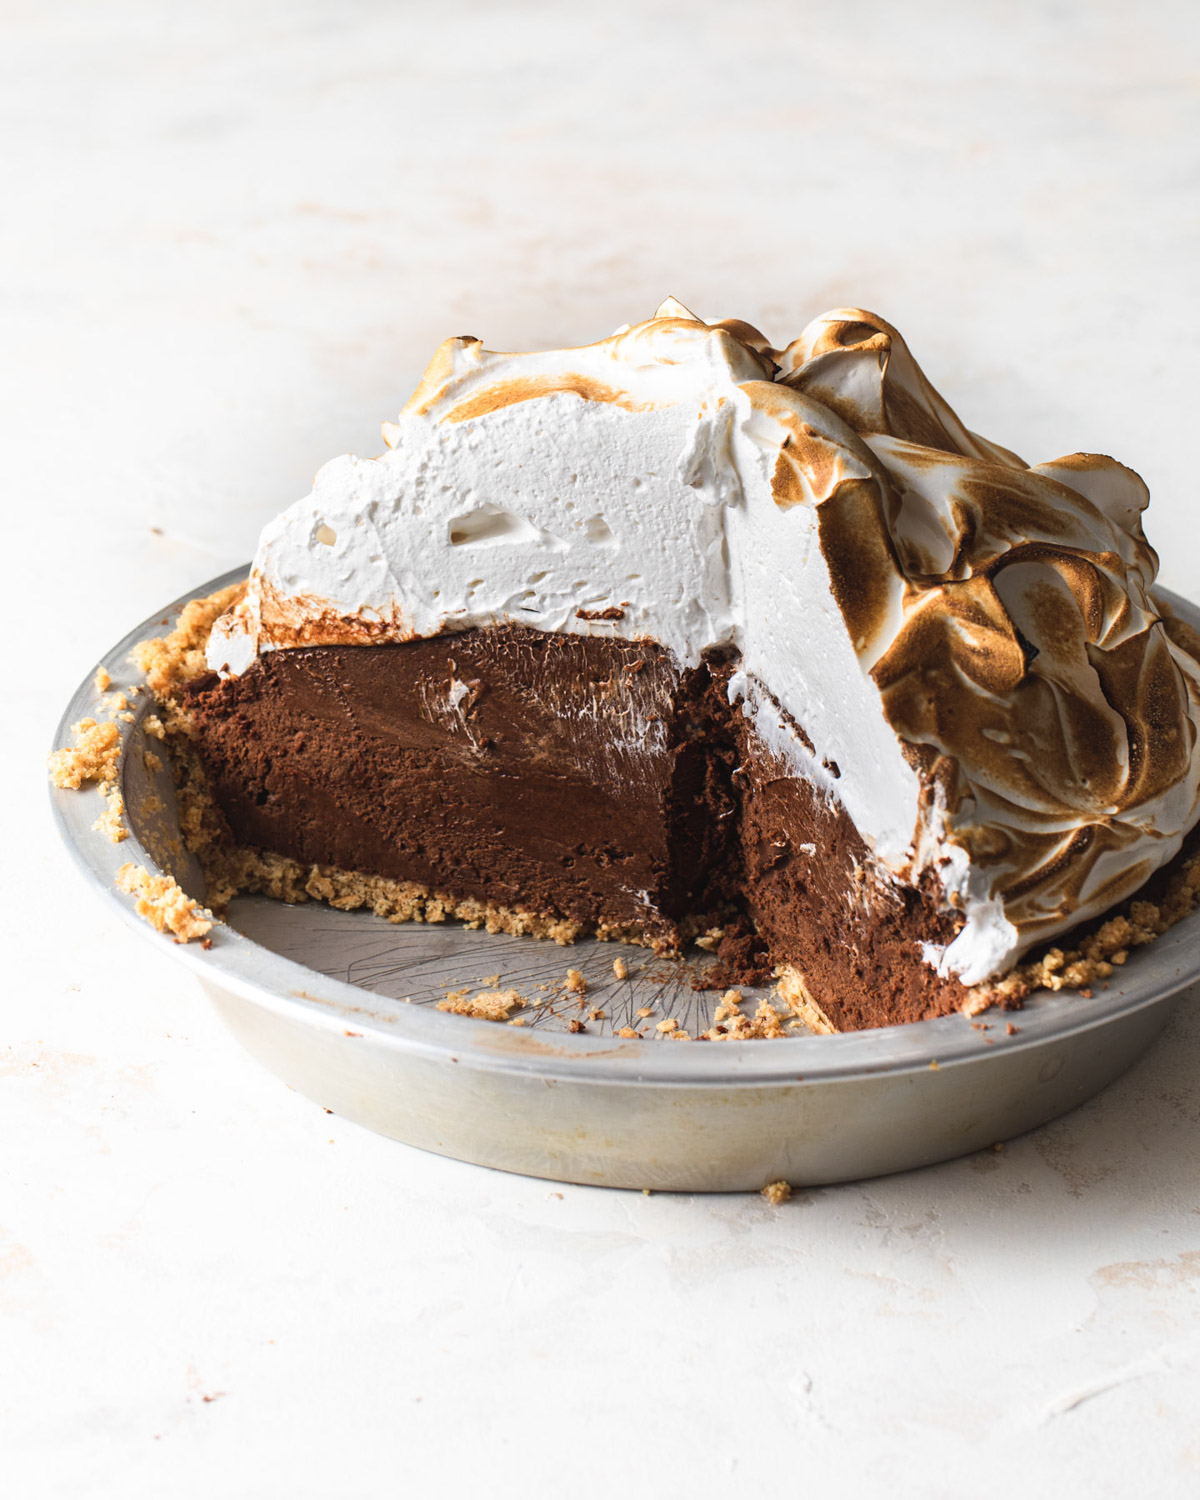 A peanut butter s'mores pie with toasted meringue topping that's been sliced open